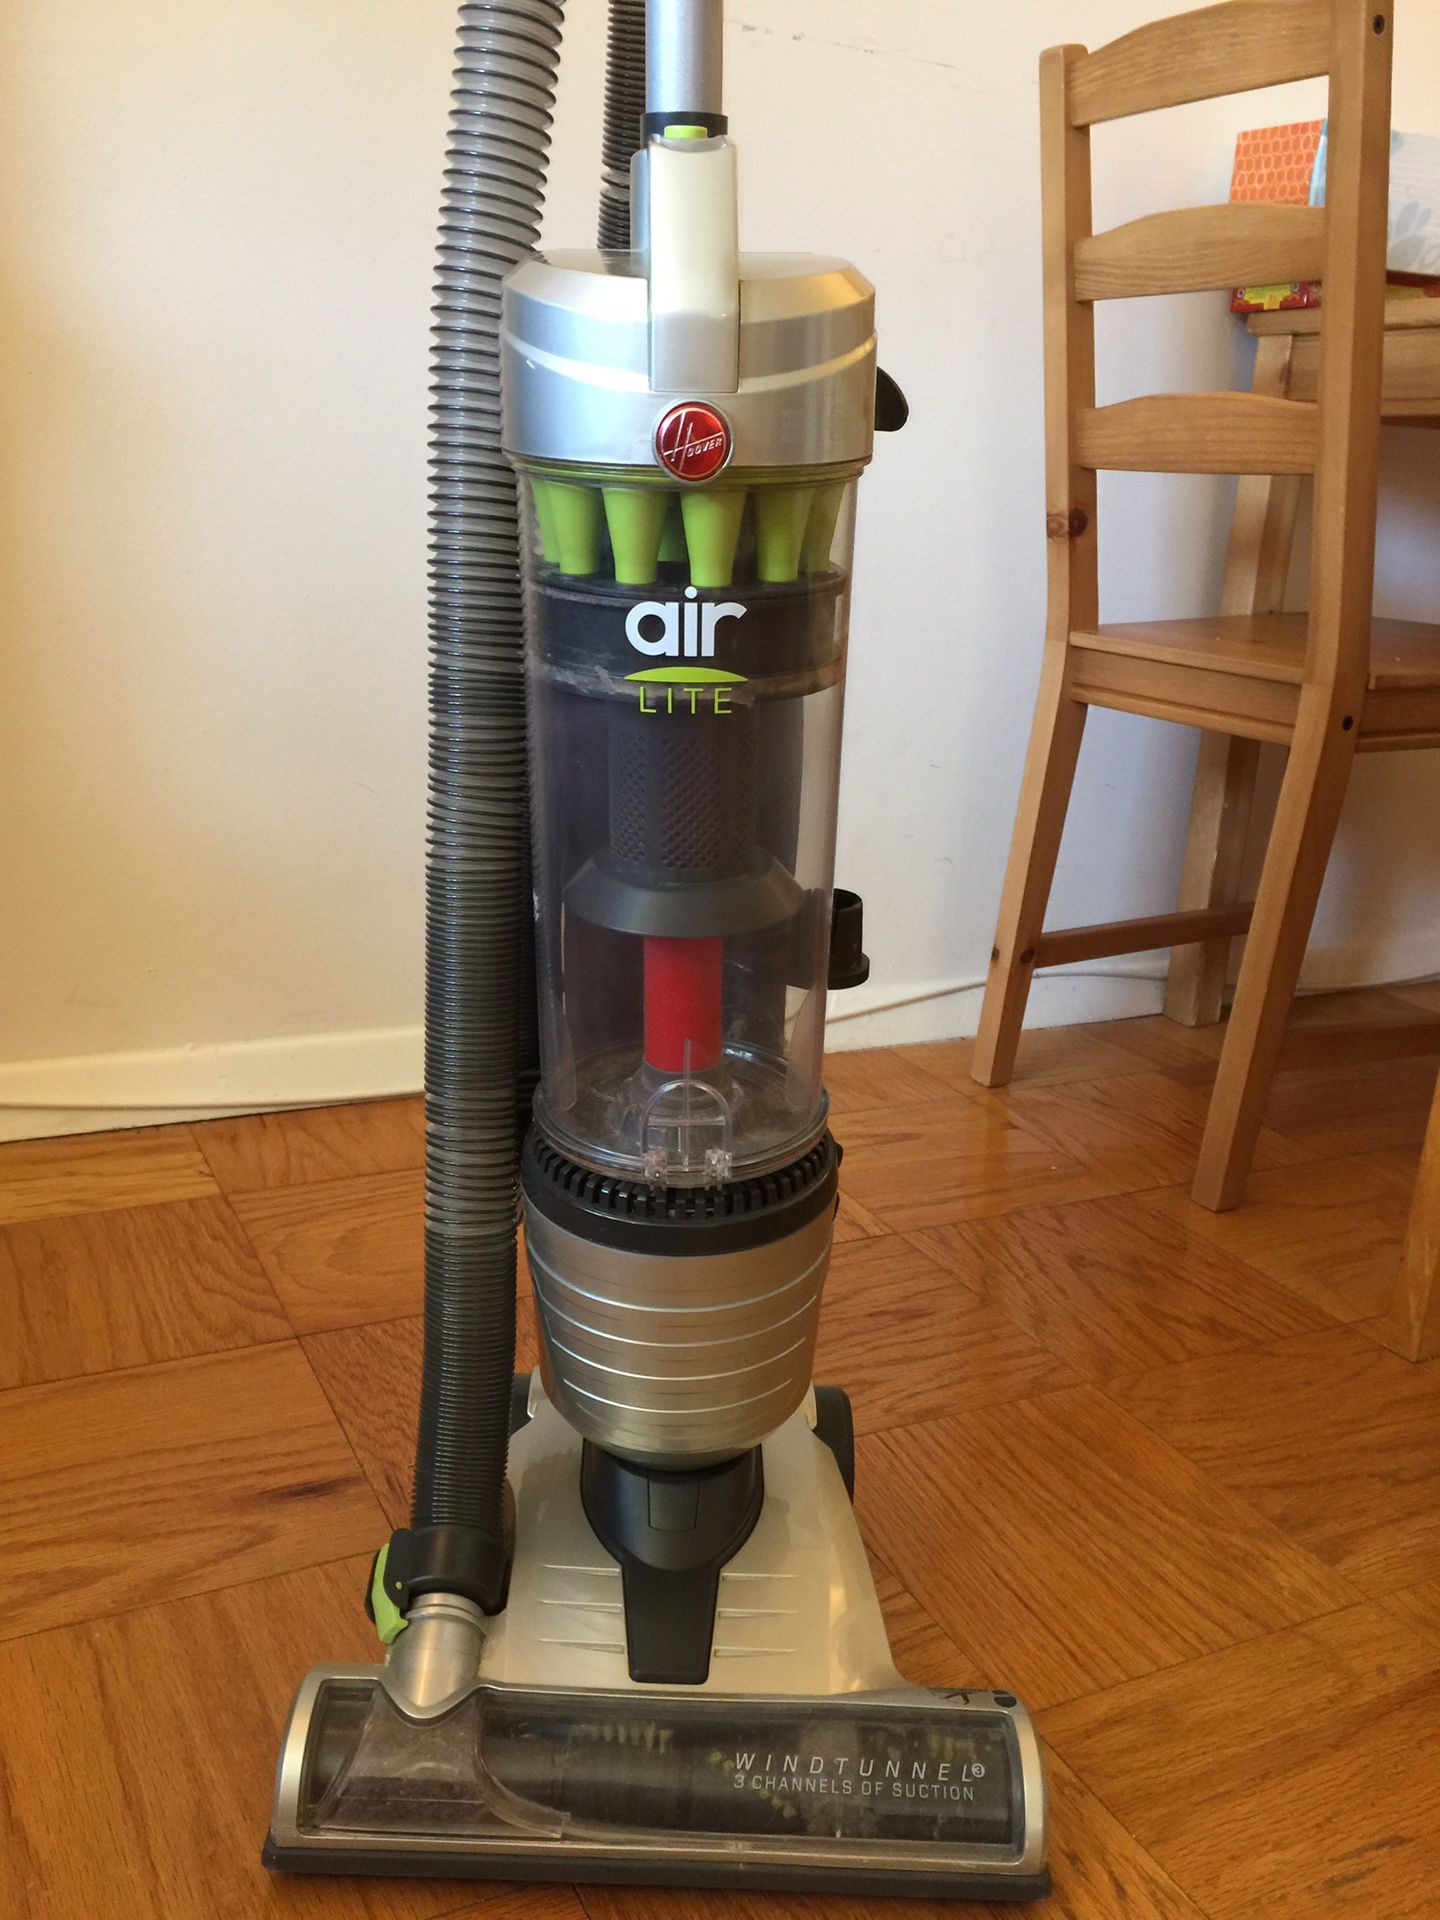 Hoover WindTunnel Air Steerable Pet Bagless Upright Vacuum, UH72405PC